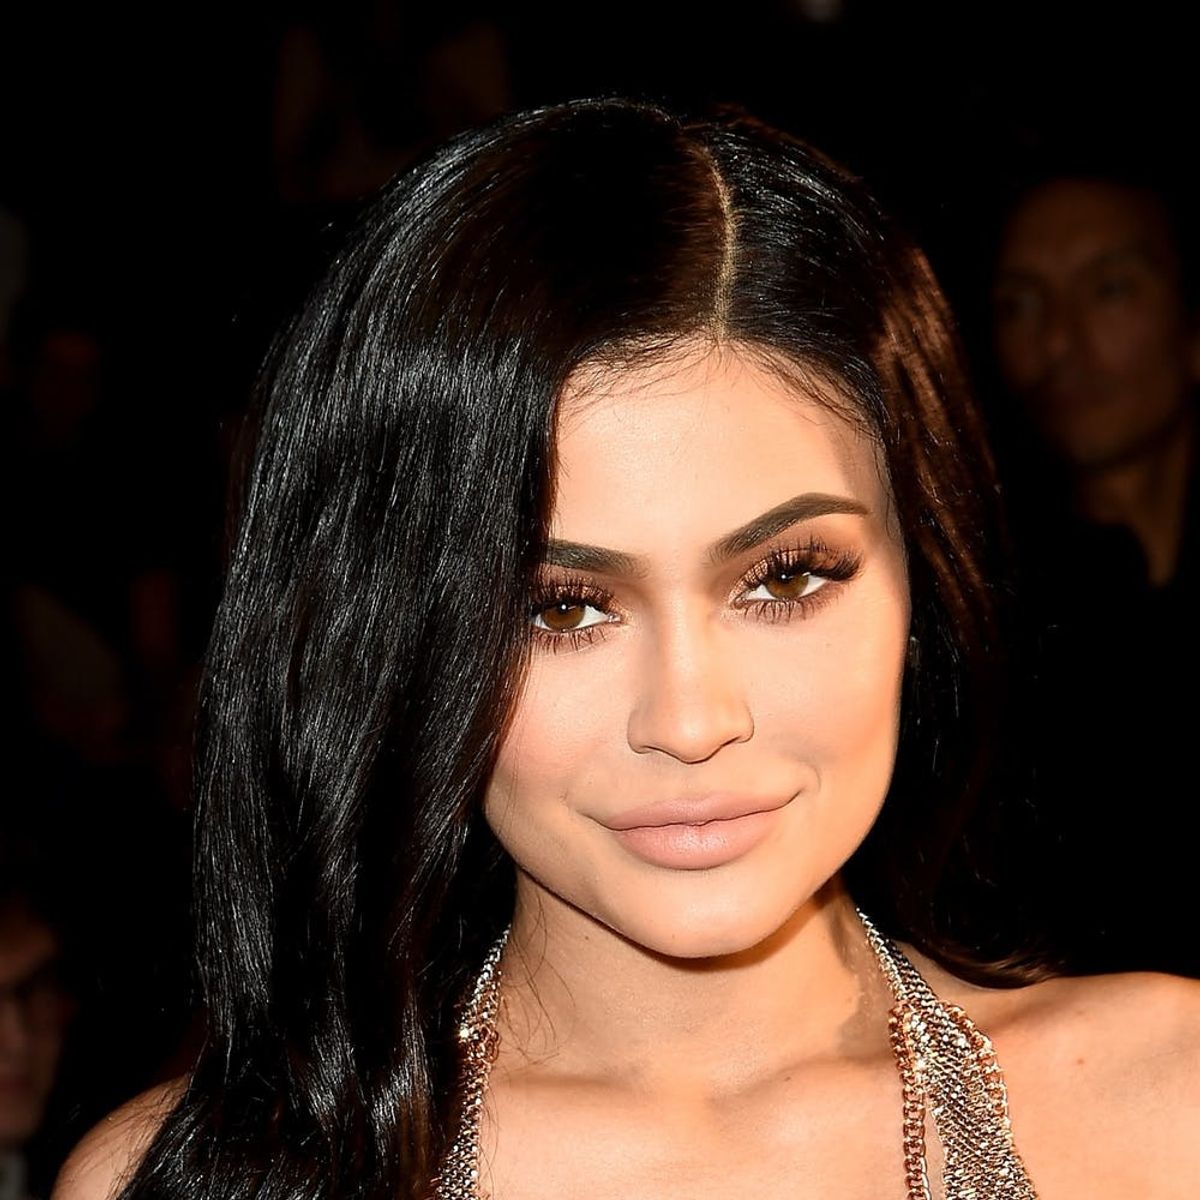 Kylie Jenner Just Won the Holiday Season With Her Insanely Tall Christmas Tree